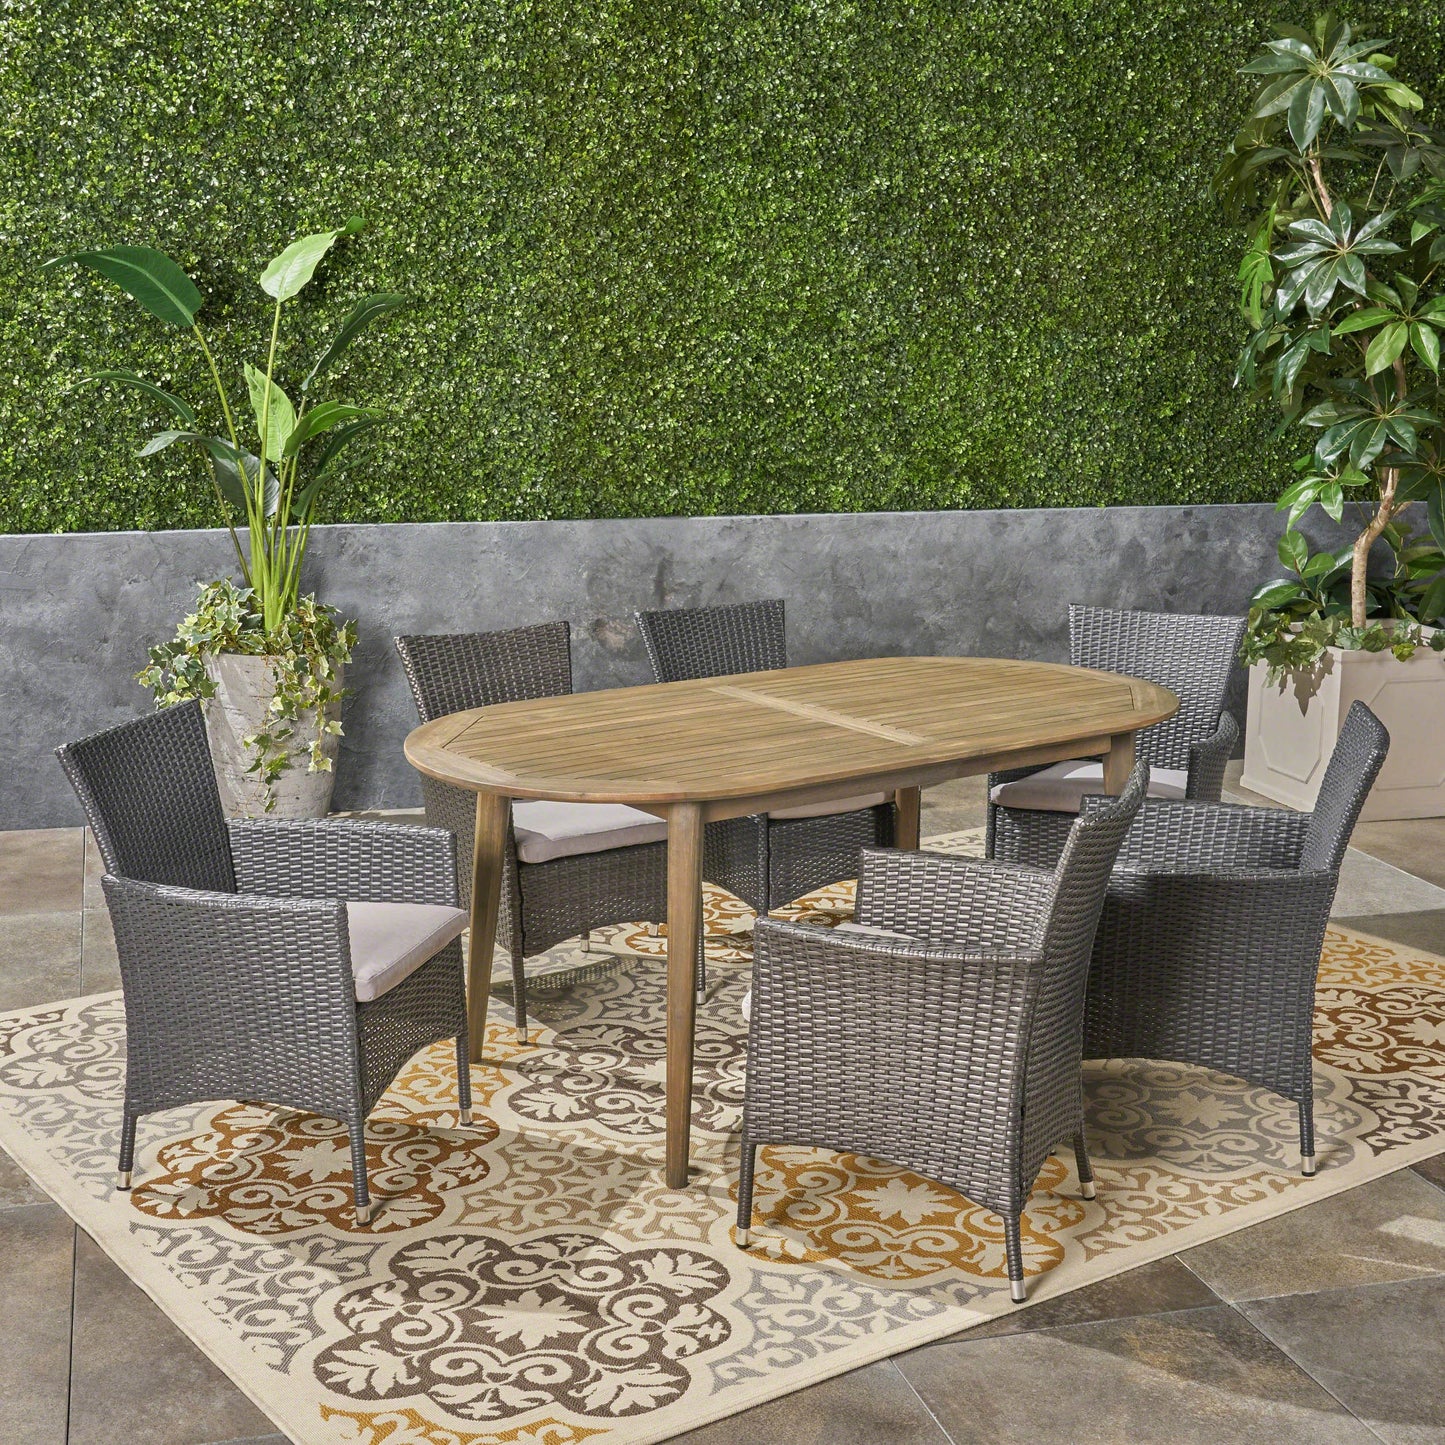 Stanford Outdoor 7-Piece Acacia Wood Dining Set with Wicker Chairs and Cushions